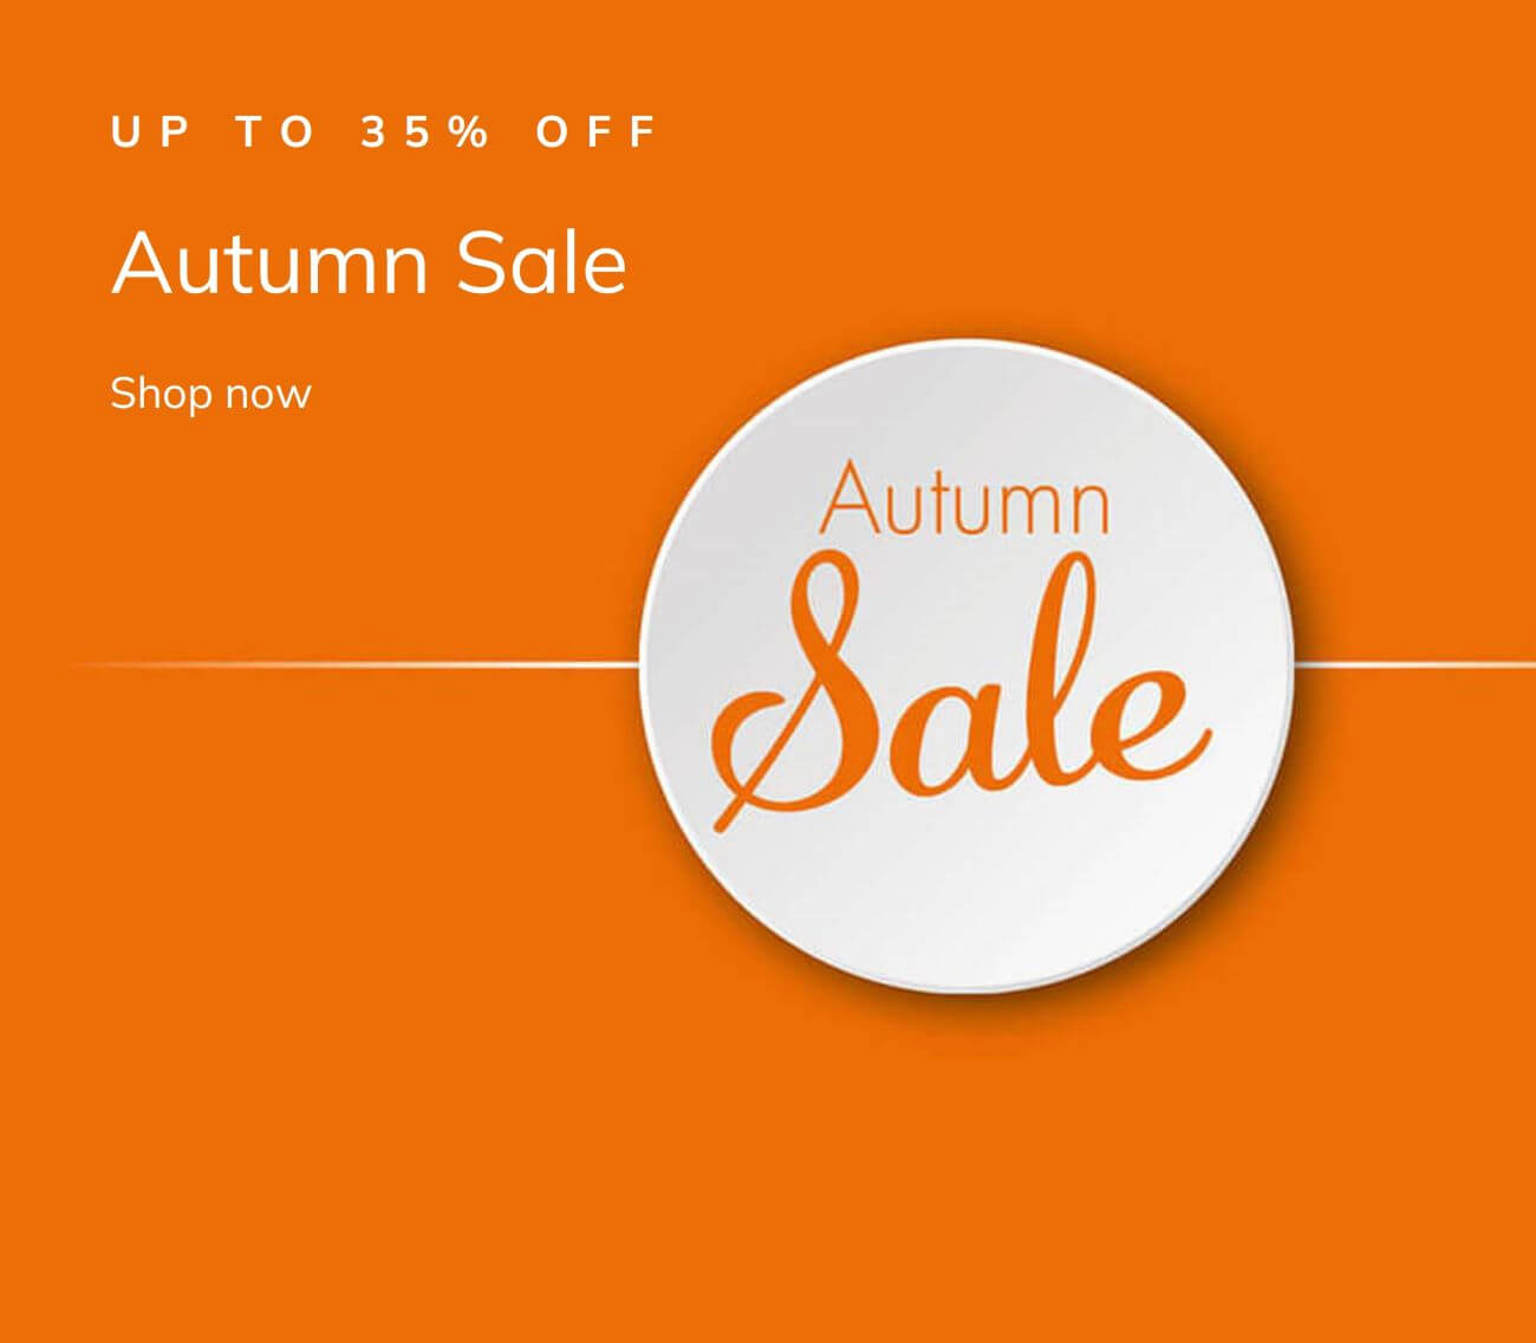 Discover affordable accessories in the outlet now in the sale